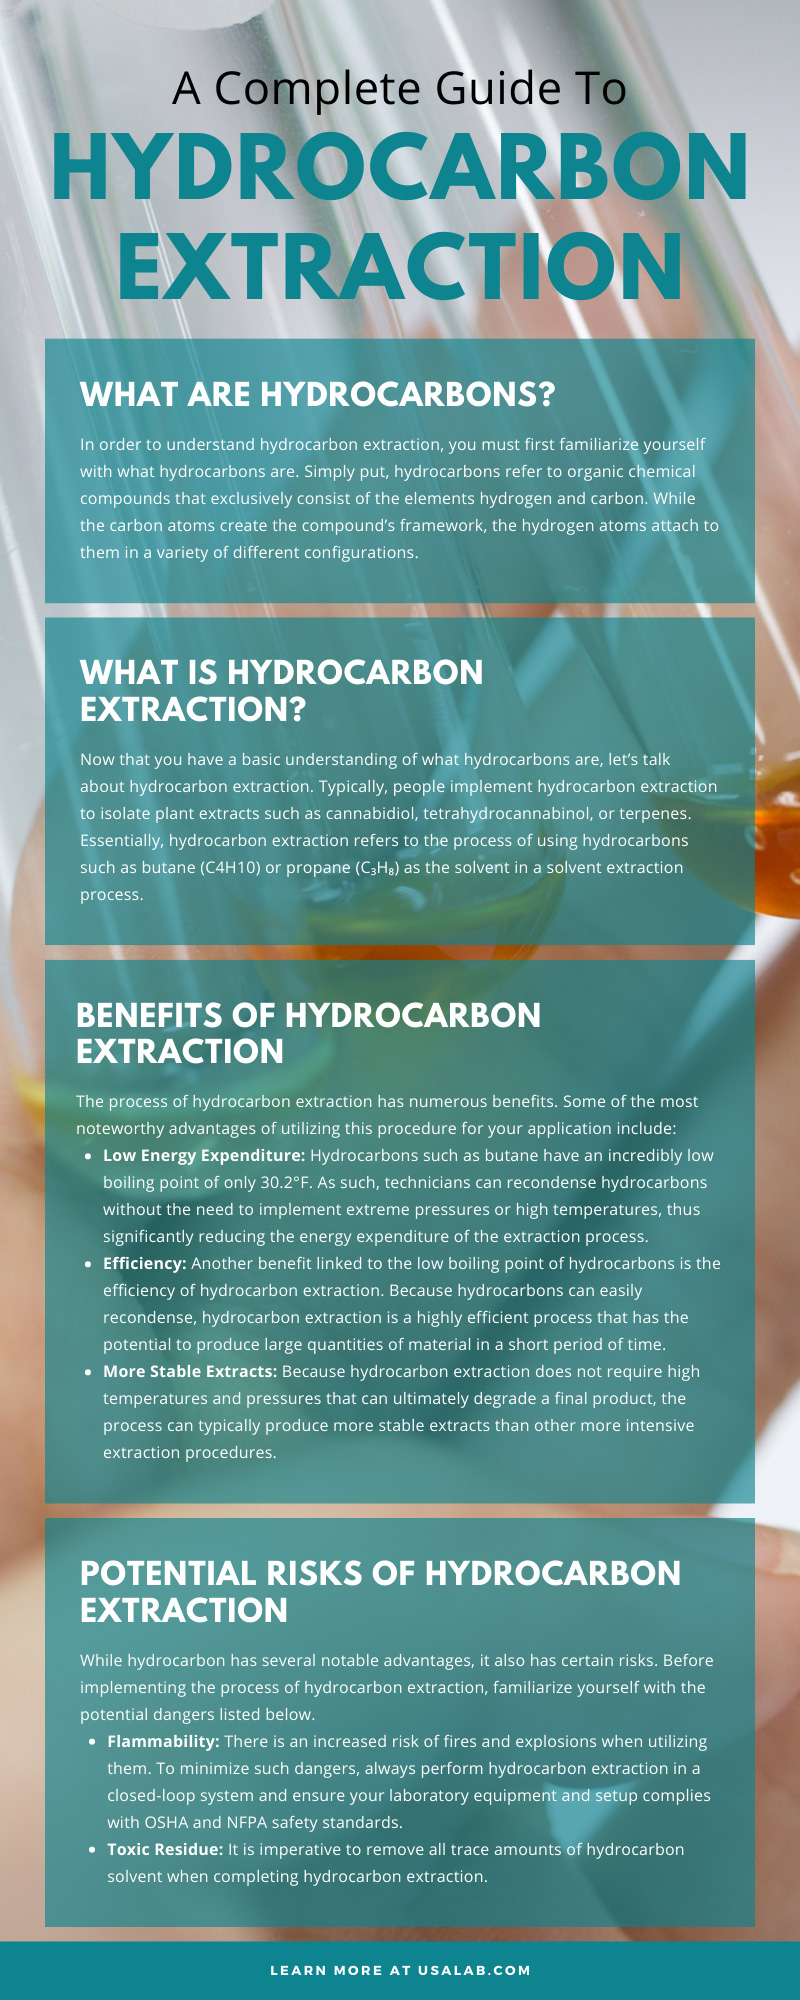 A Complete Guide To Hydrocarbon Extraction